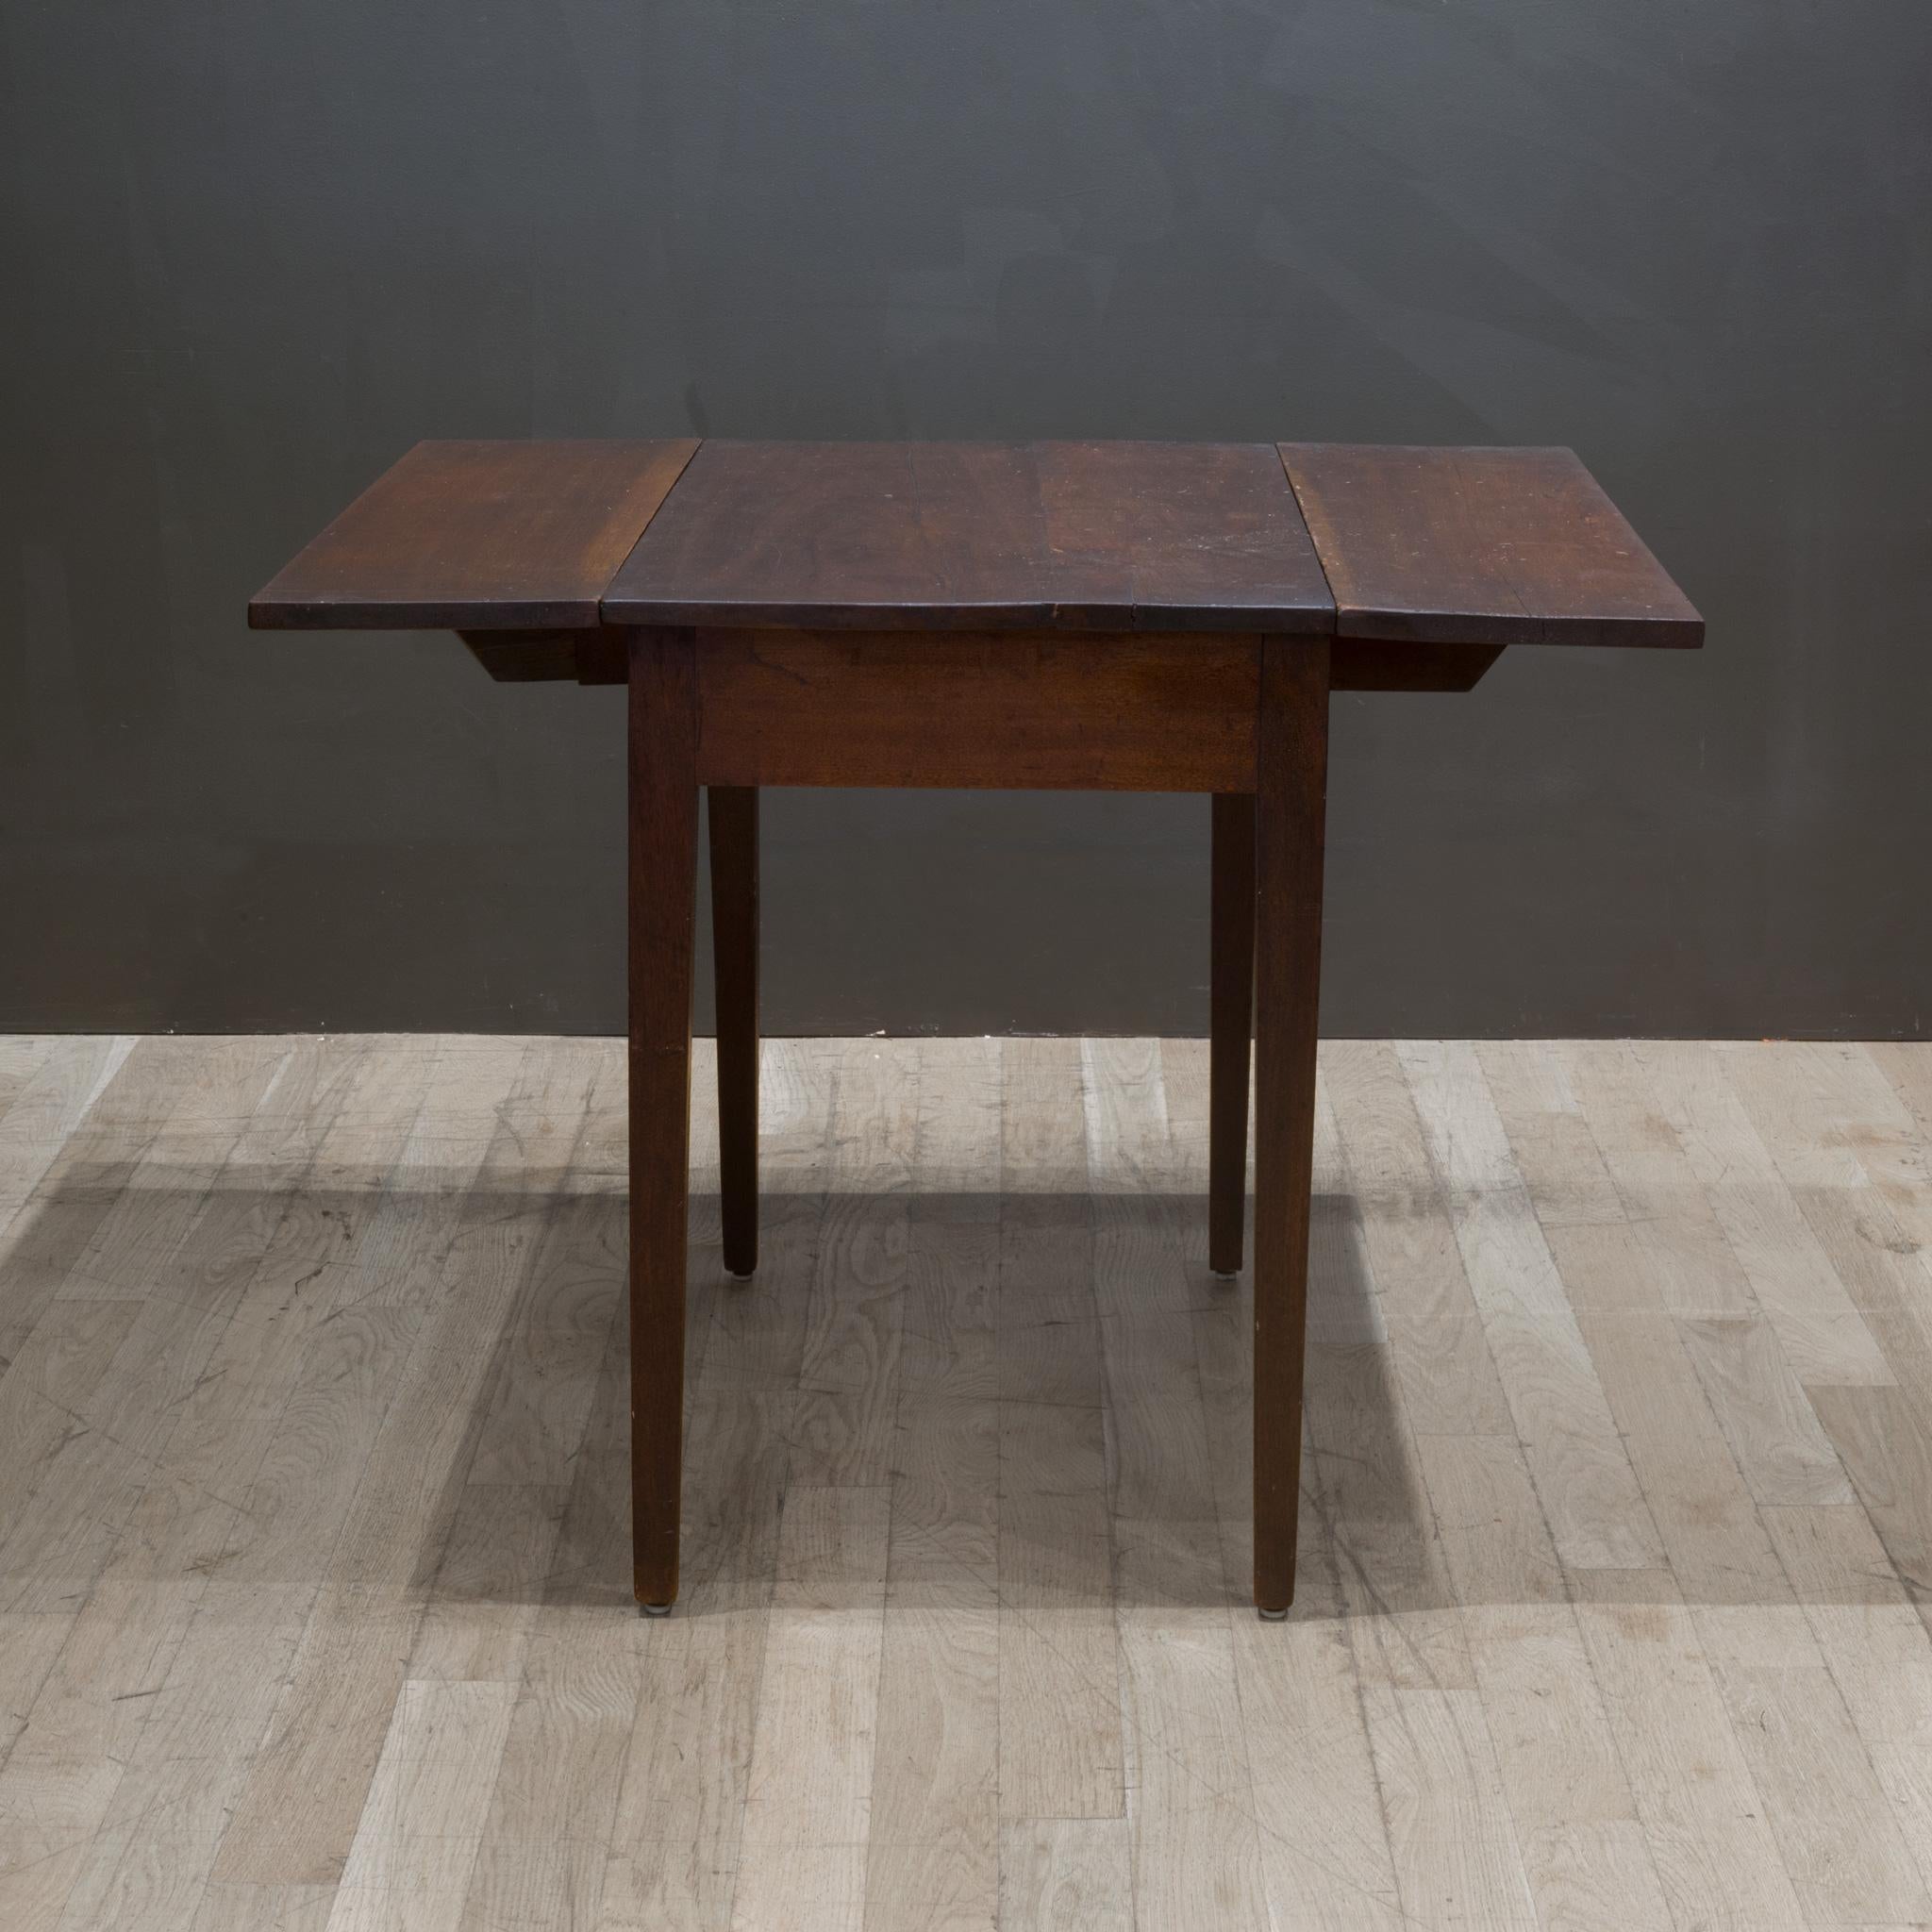 Wood Rustic Drop Leaf Dining Table/Console c.1940